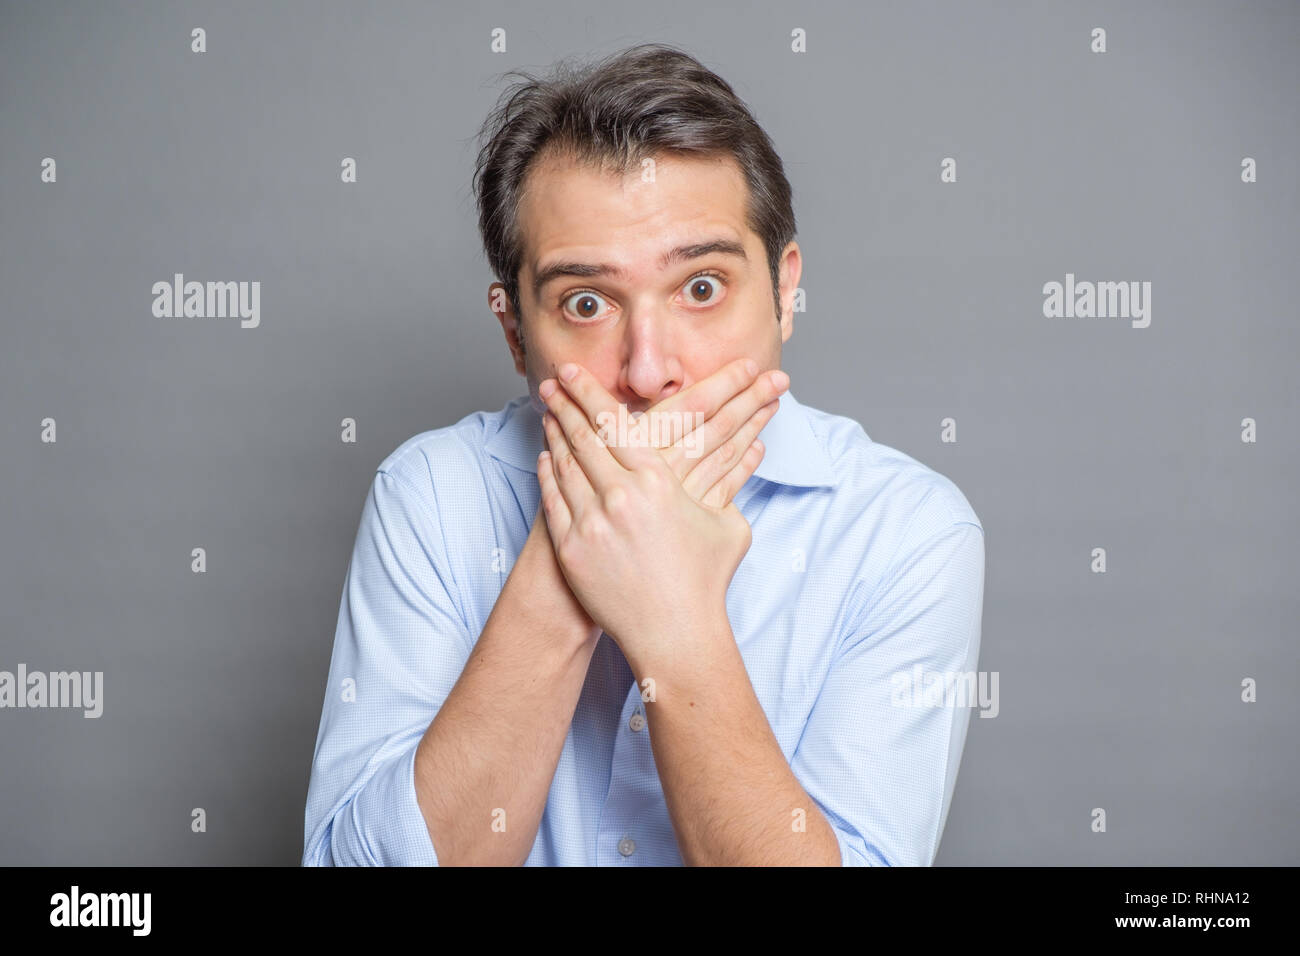 Man covering mouth on gray background Stock Photo